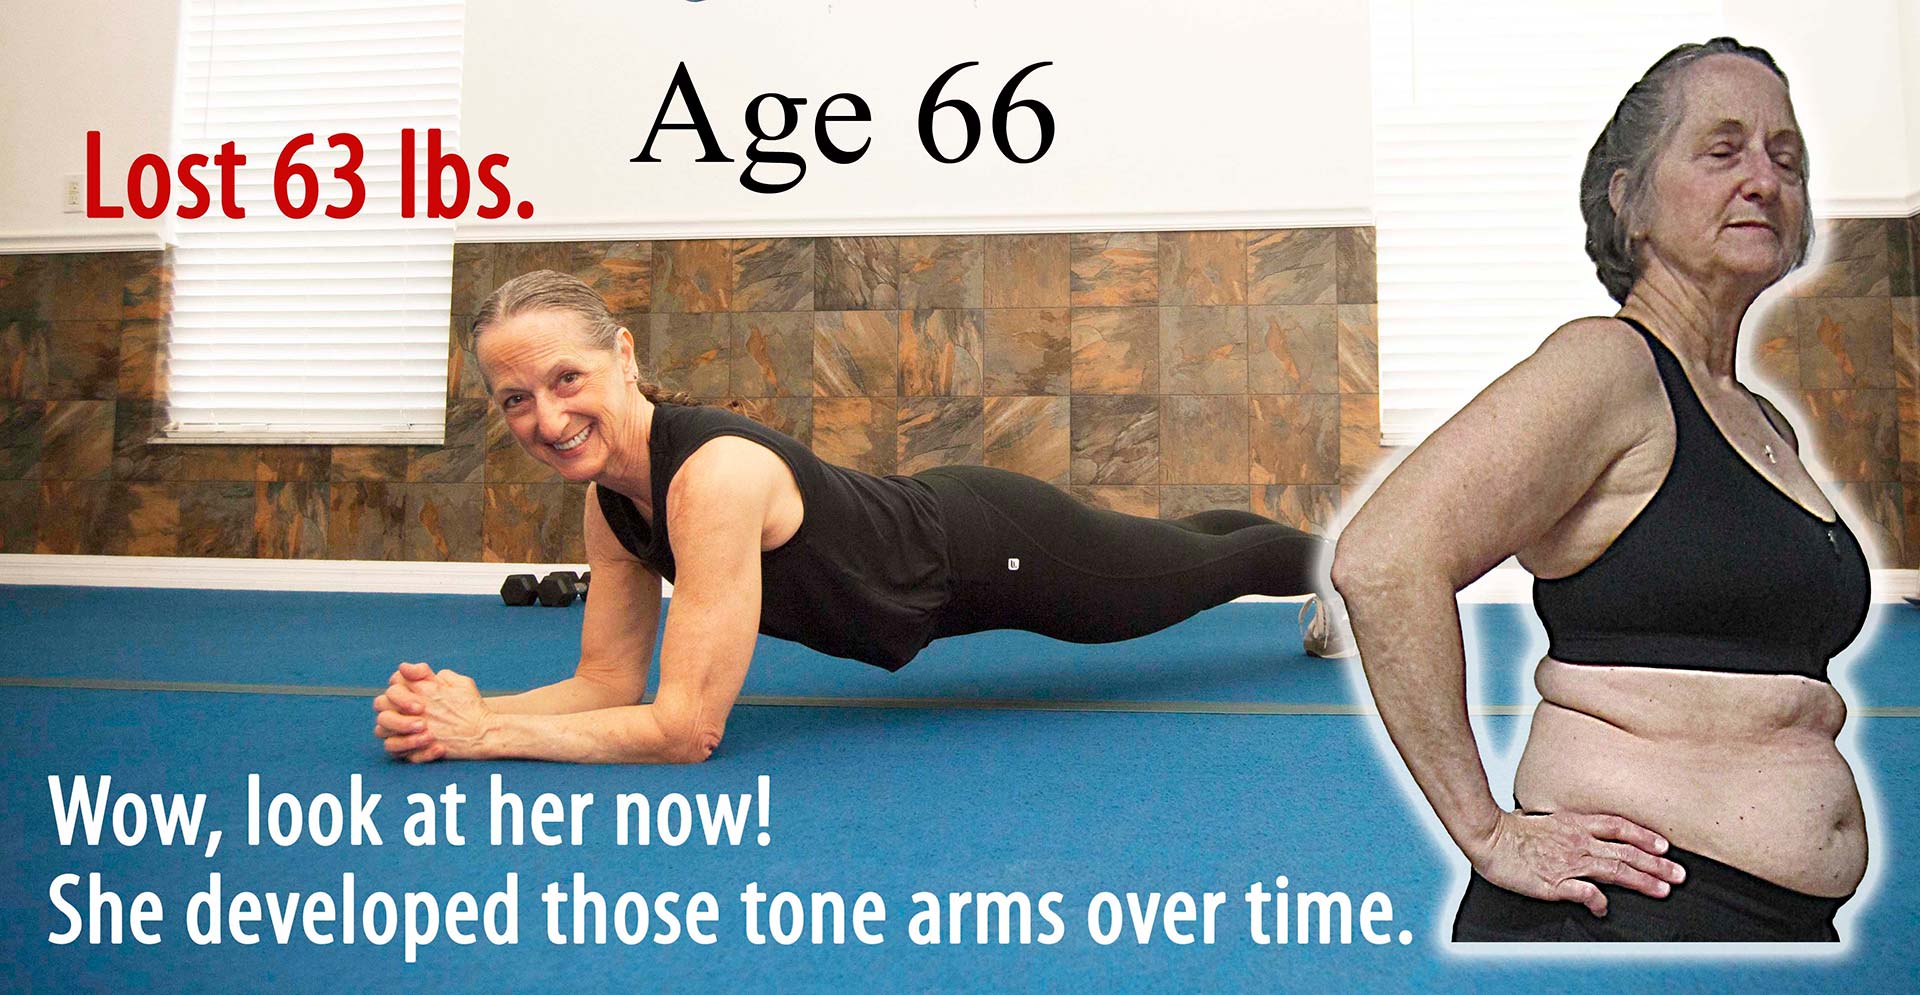 Land O' Lakes Boot Camp Member Kate lost 60 lbs. with us